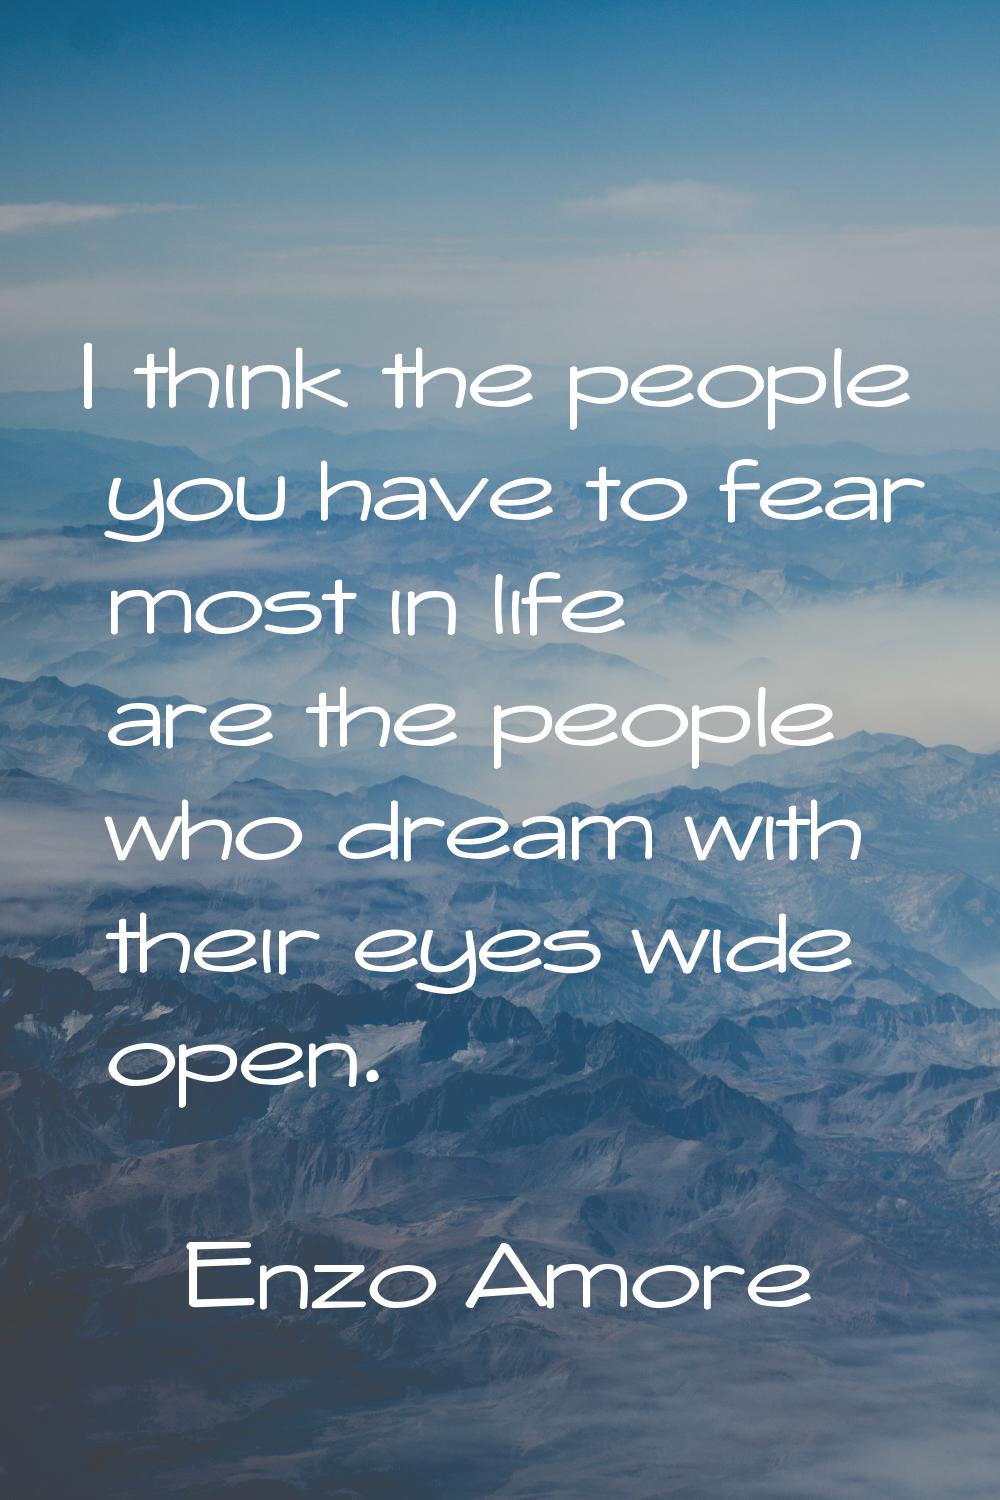 I think the people you have to fear most in life are the people who dream with their eyes wide open